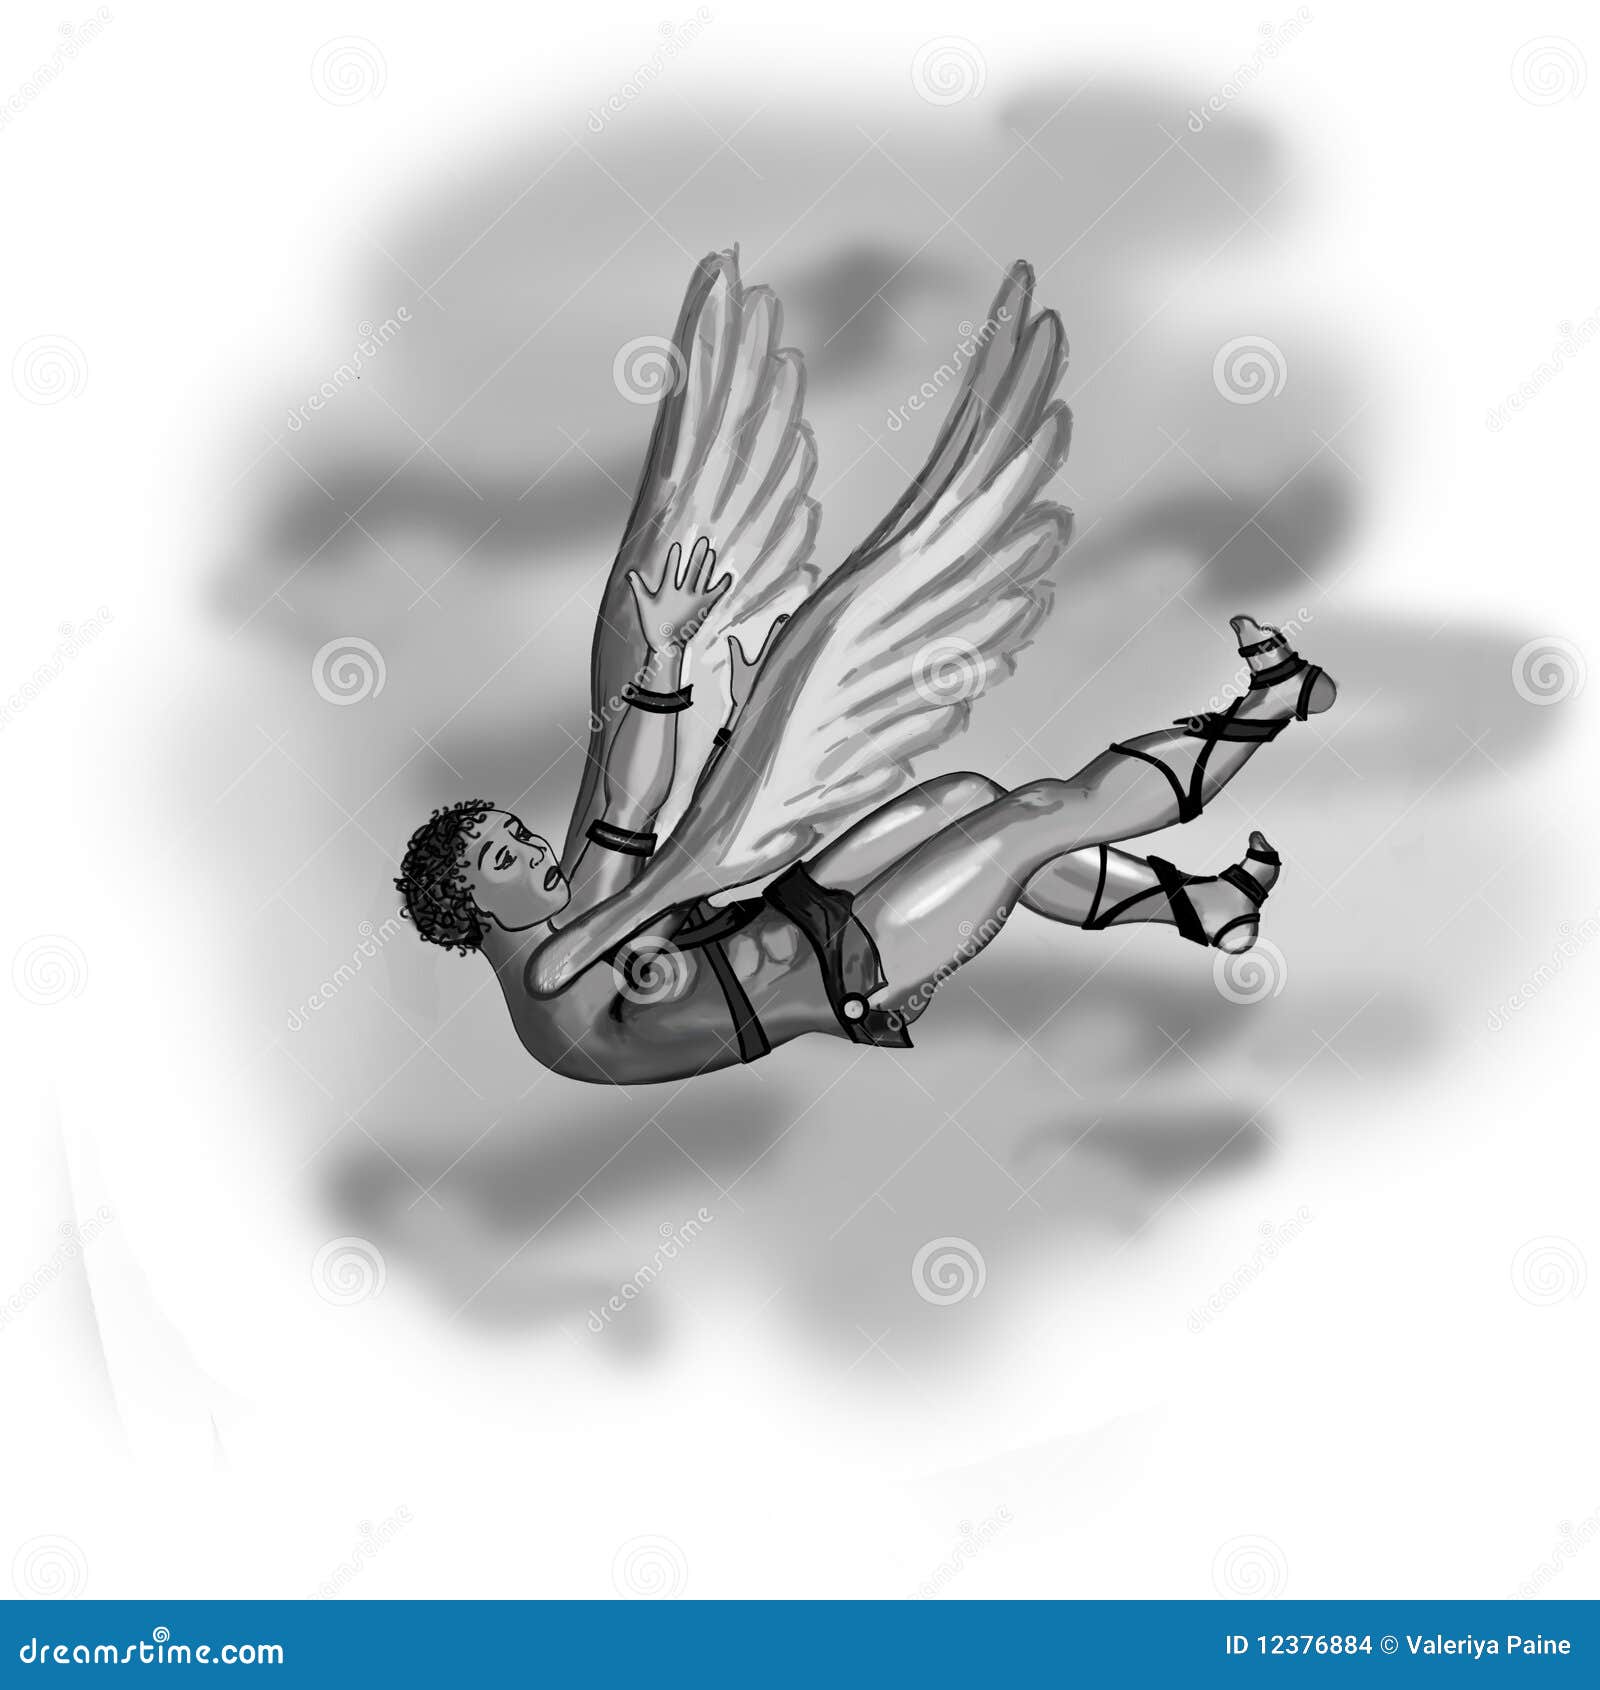 Icarus, character of ancient Greek legend. Vector drawing Stock